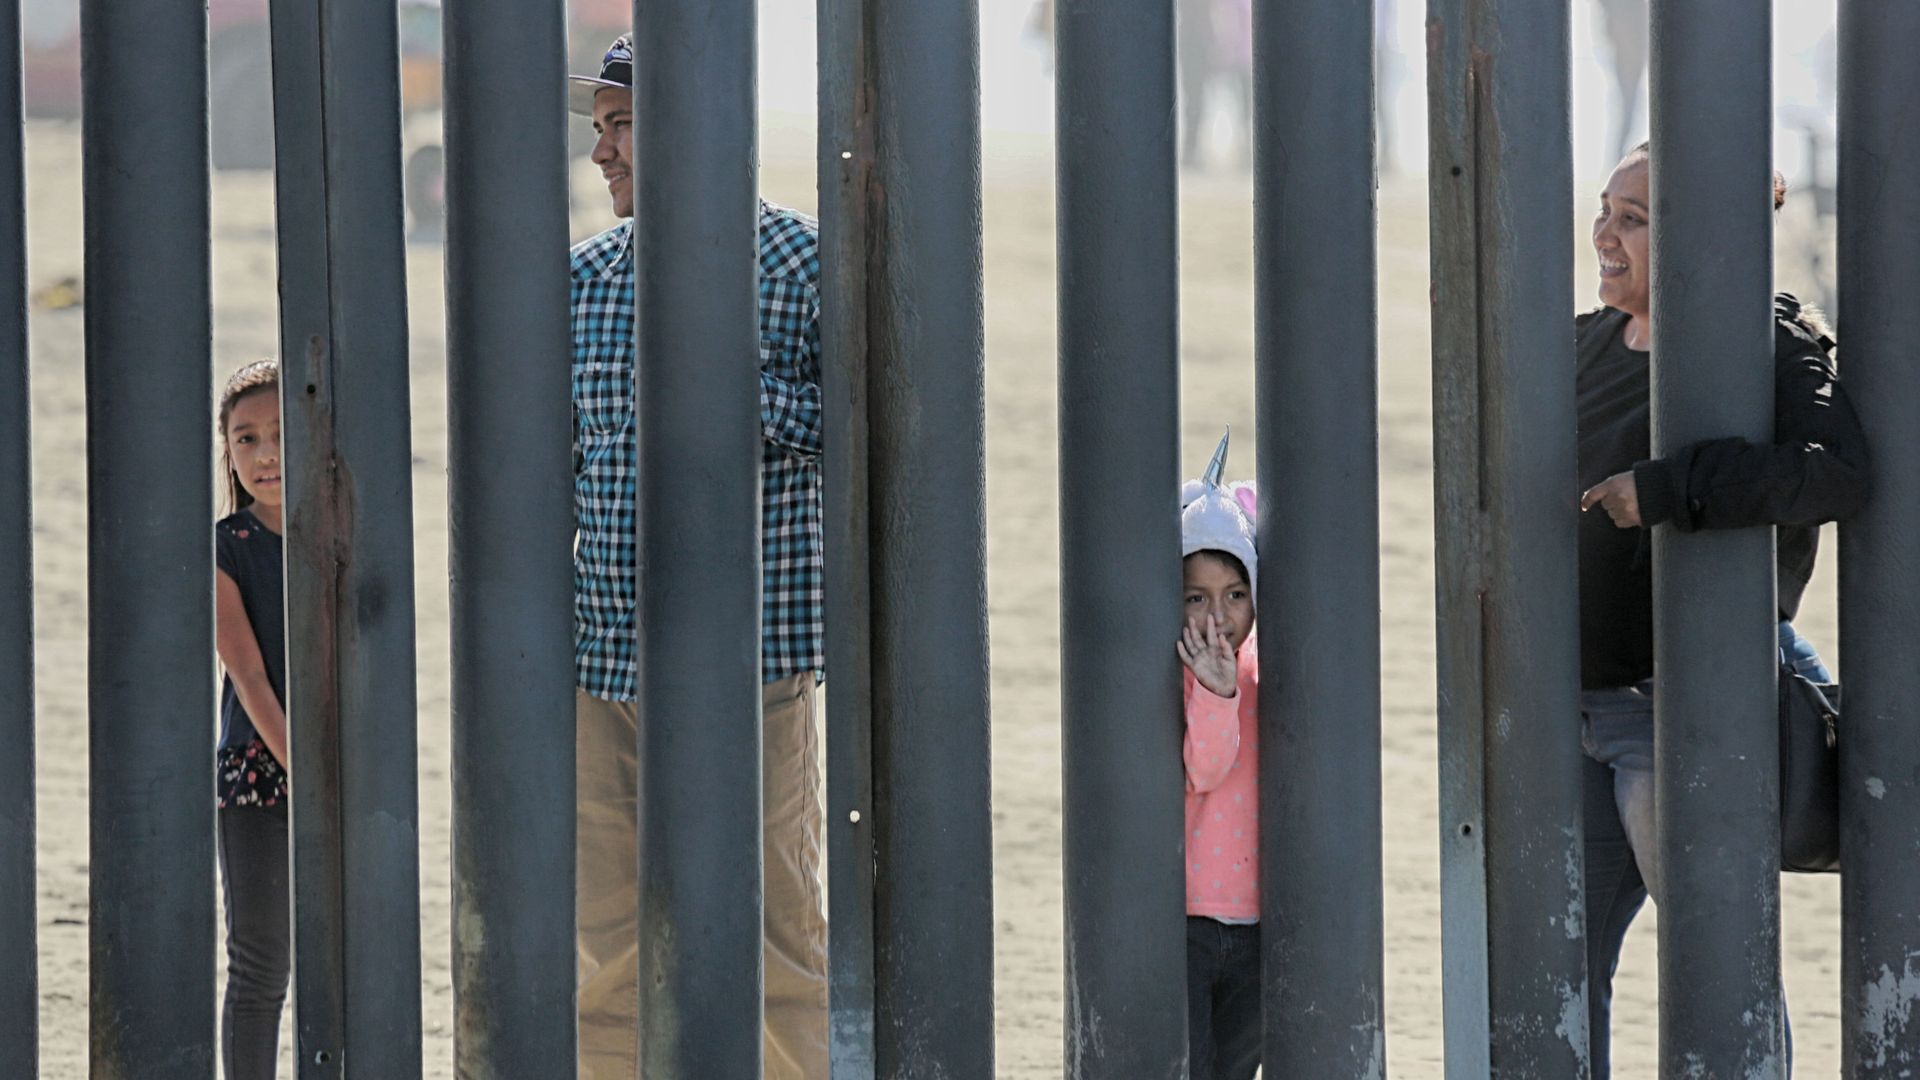 A family looks through metal bars in a fence